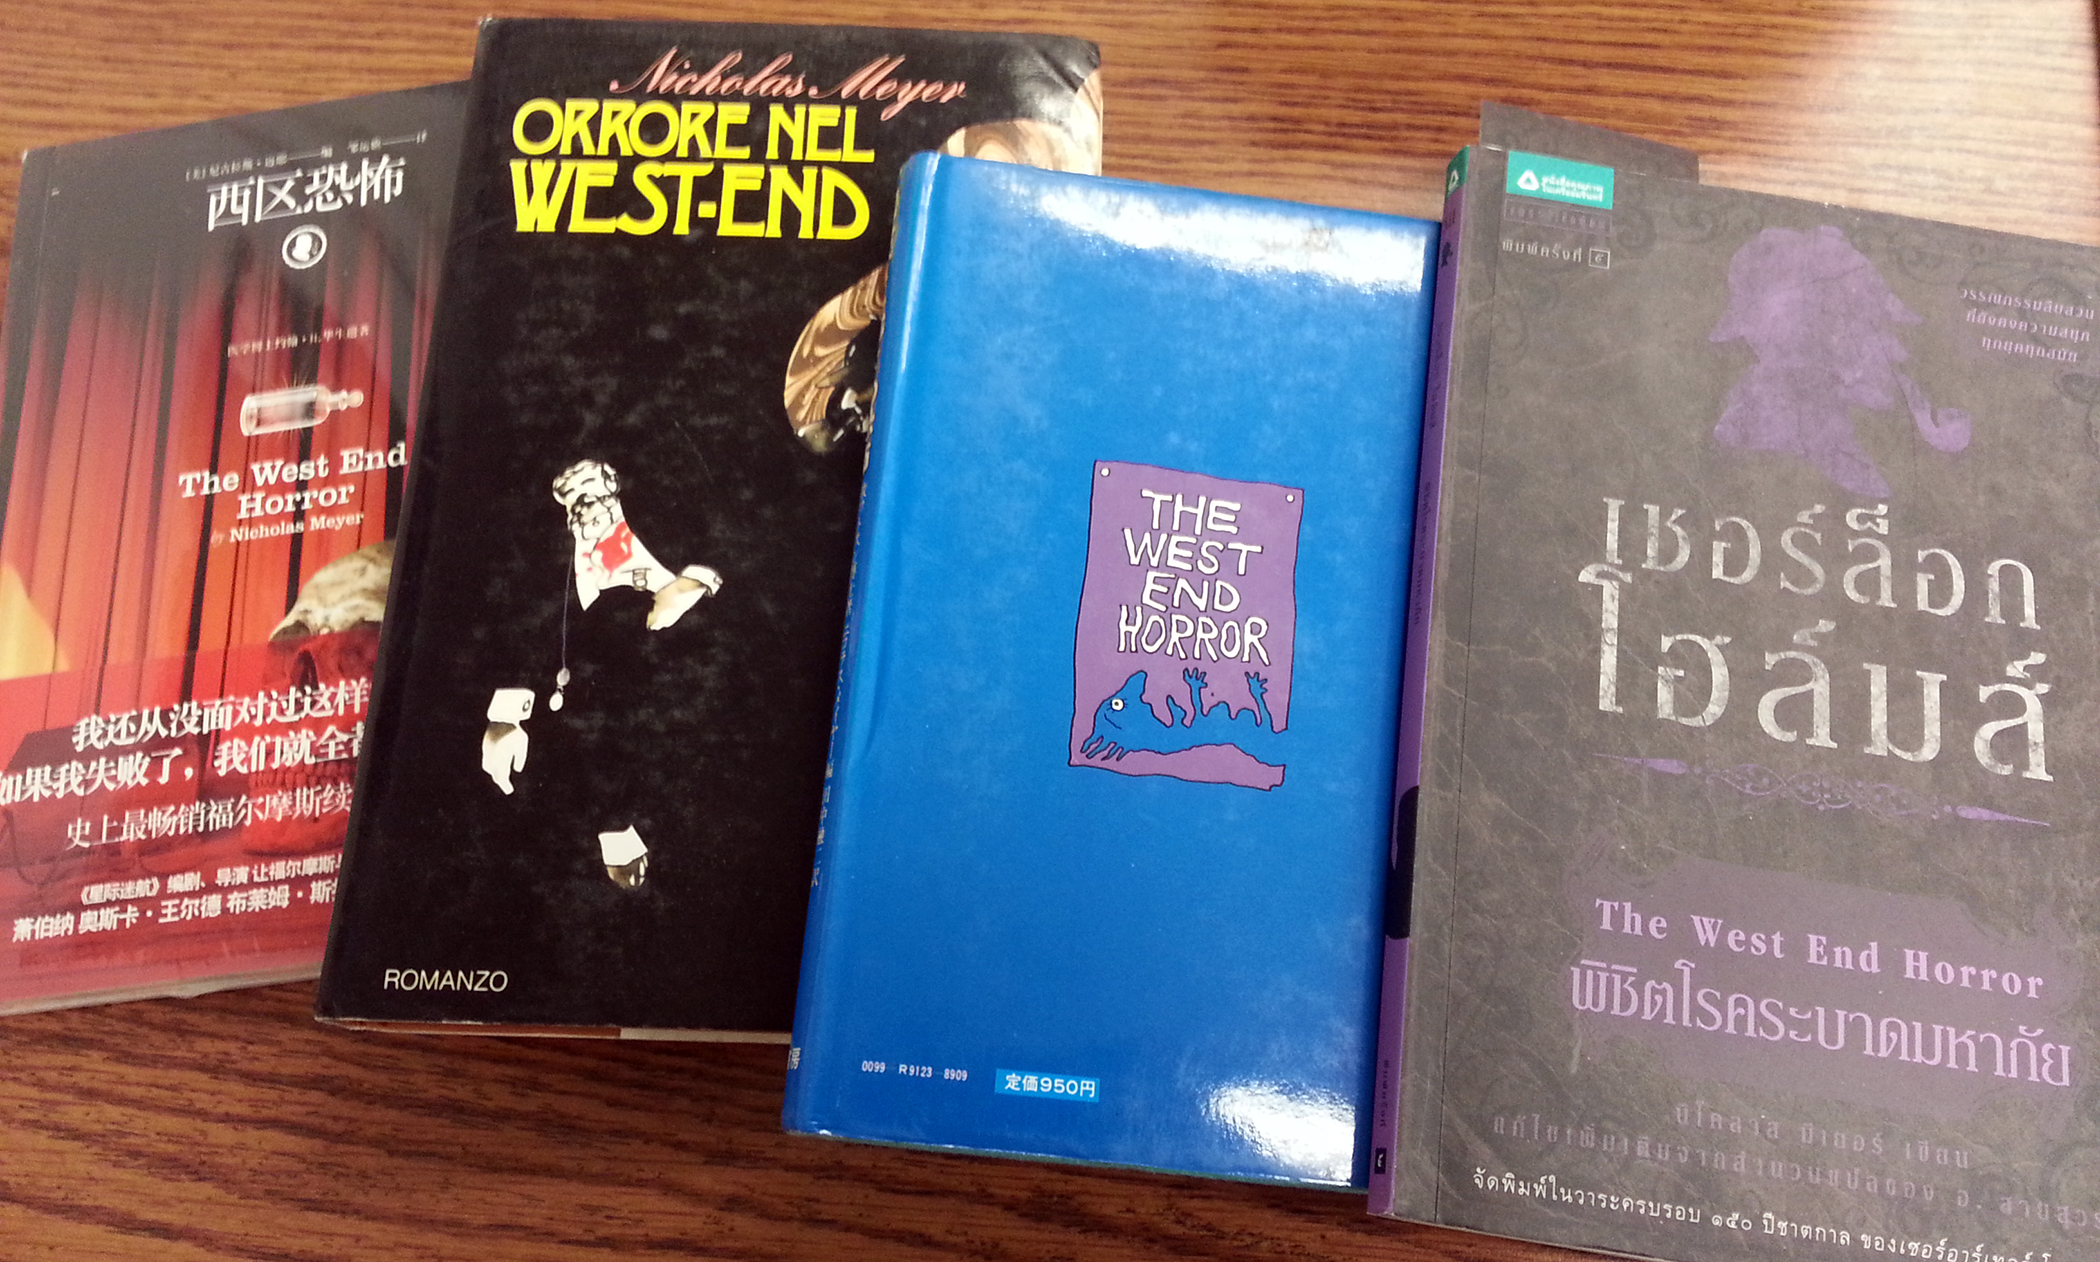 West End Horror books donated by Nicholas Meyer